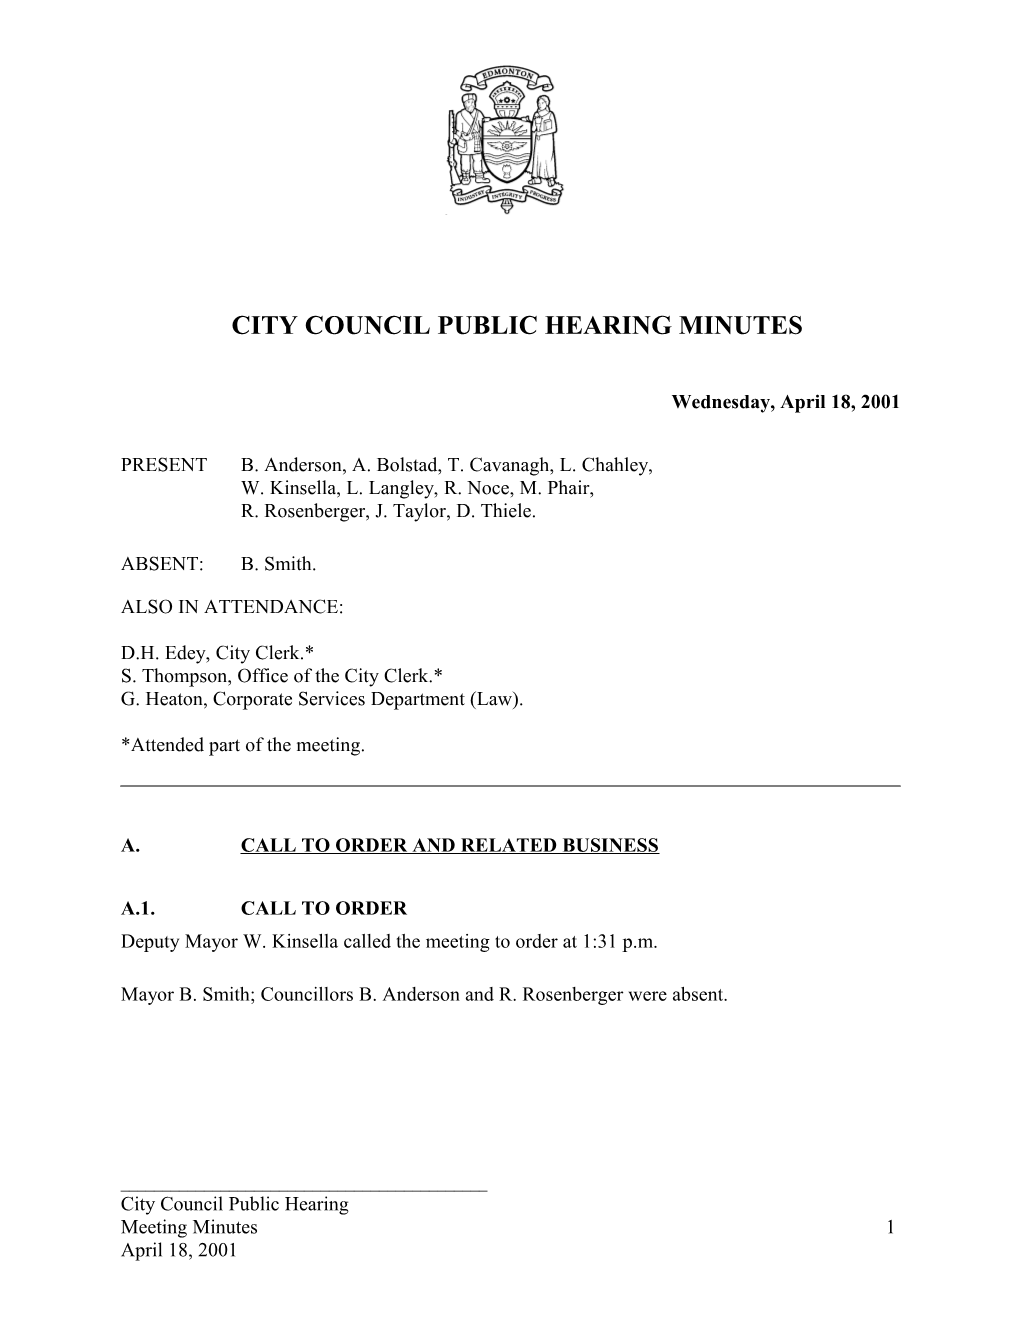 Minutes for City Council April 18, 2001 Meeting